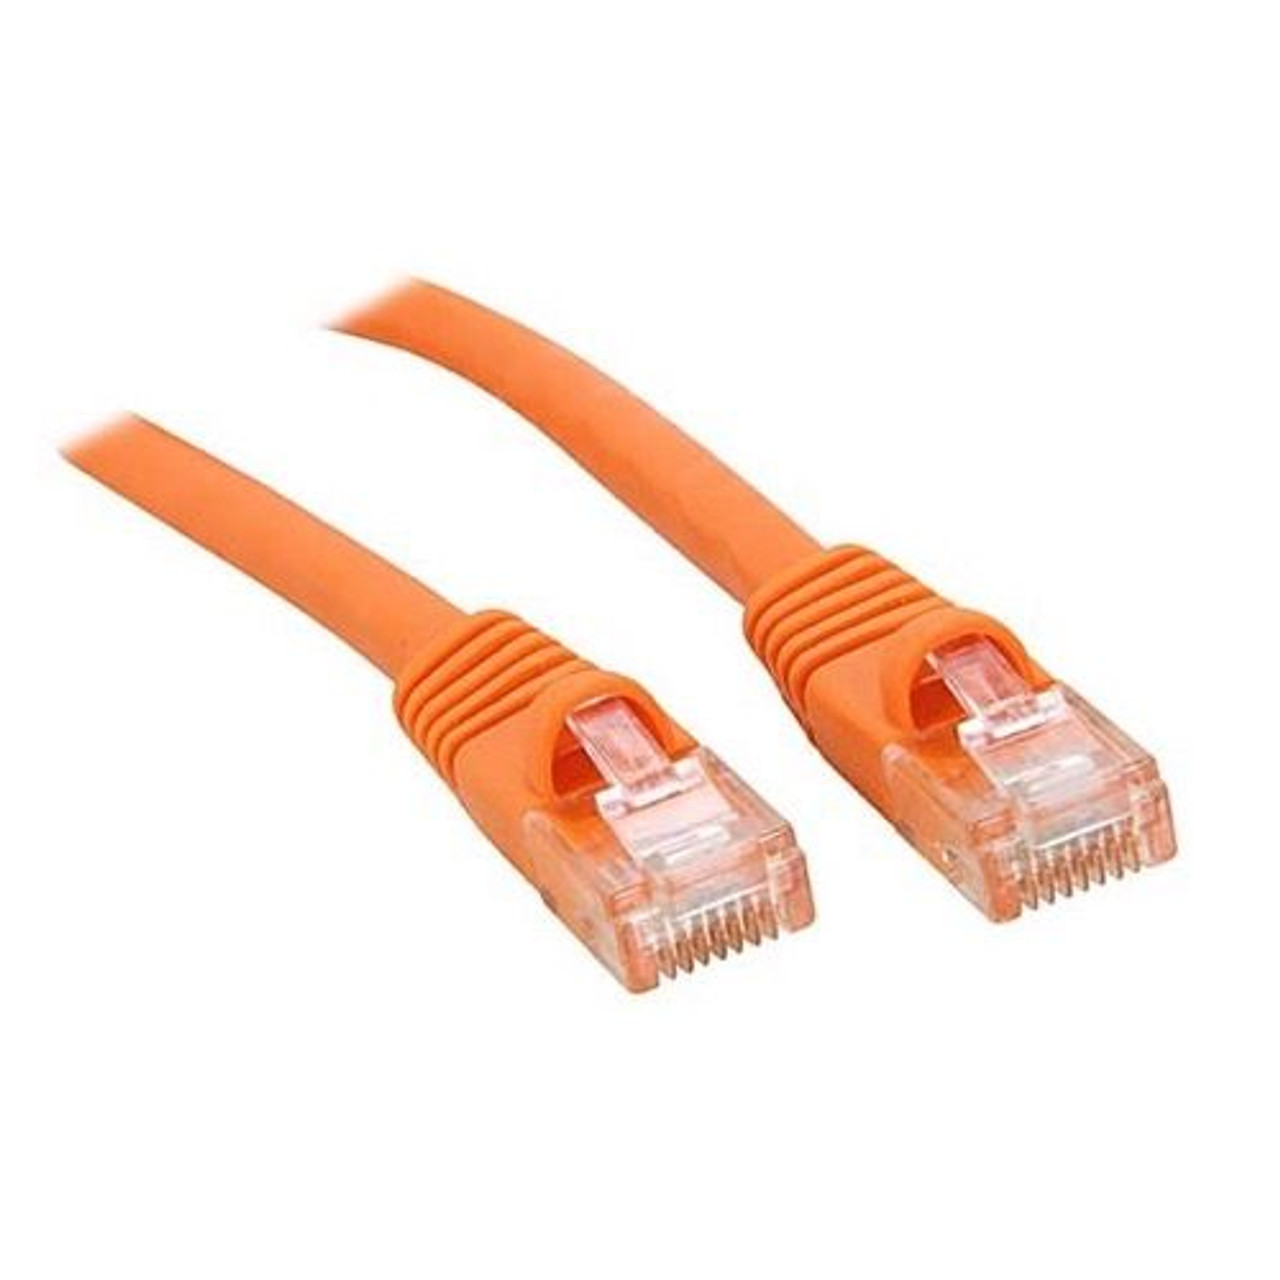 Steren 308-903OR 3' FT CAT6 Patch Cord Cable Orange 24 AWG Stranded Copper UTP Snagless RJ45 Gold Flush Molded Booted 550 MHz RJ-45 Network Male to Male, Part # 308903-OR